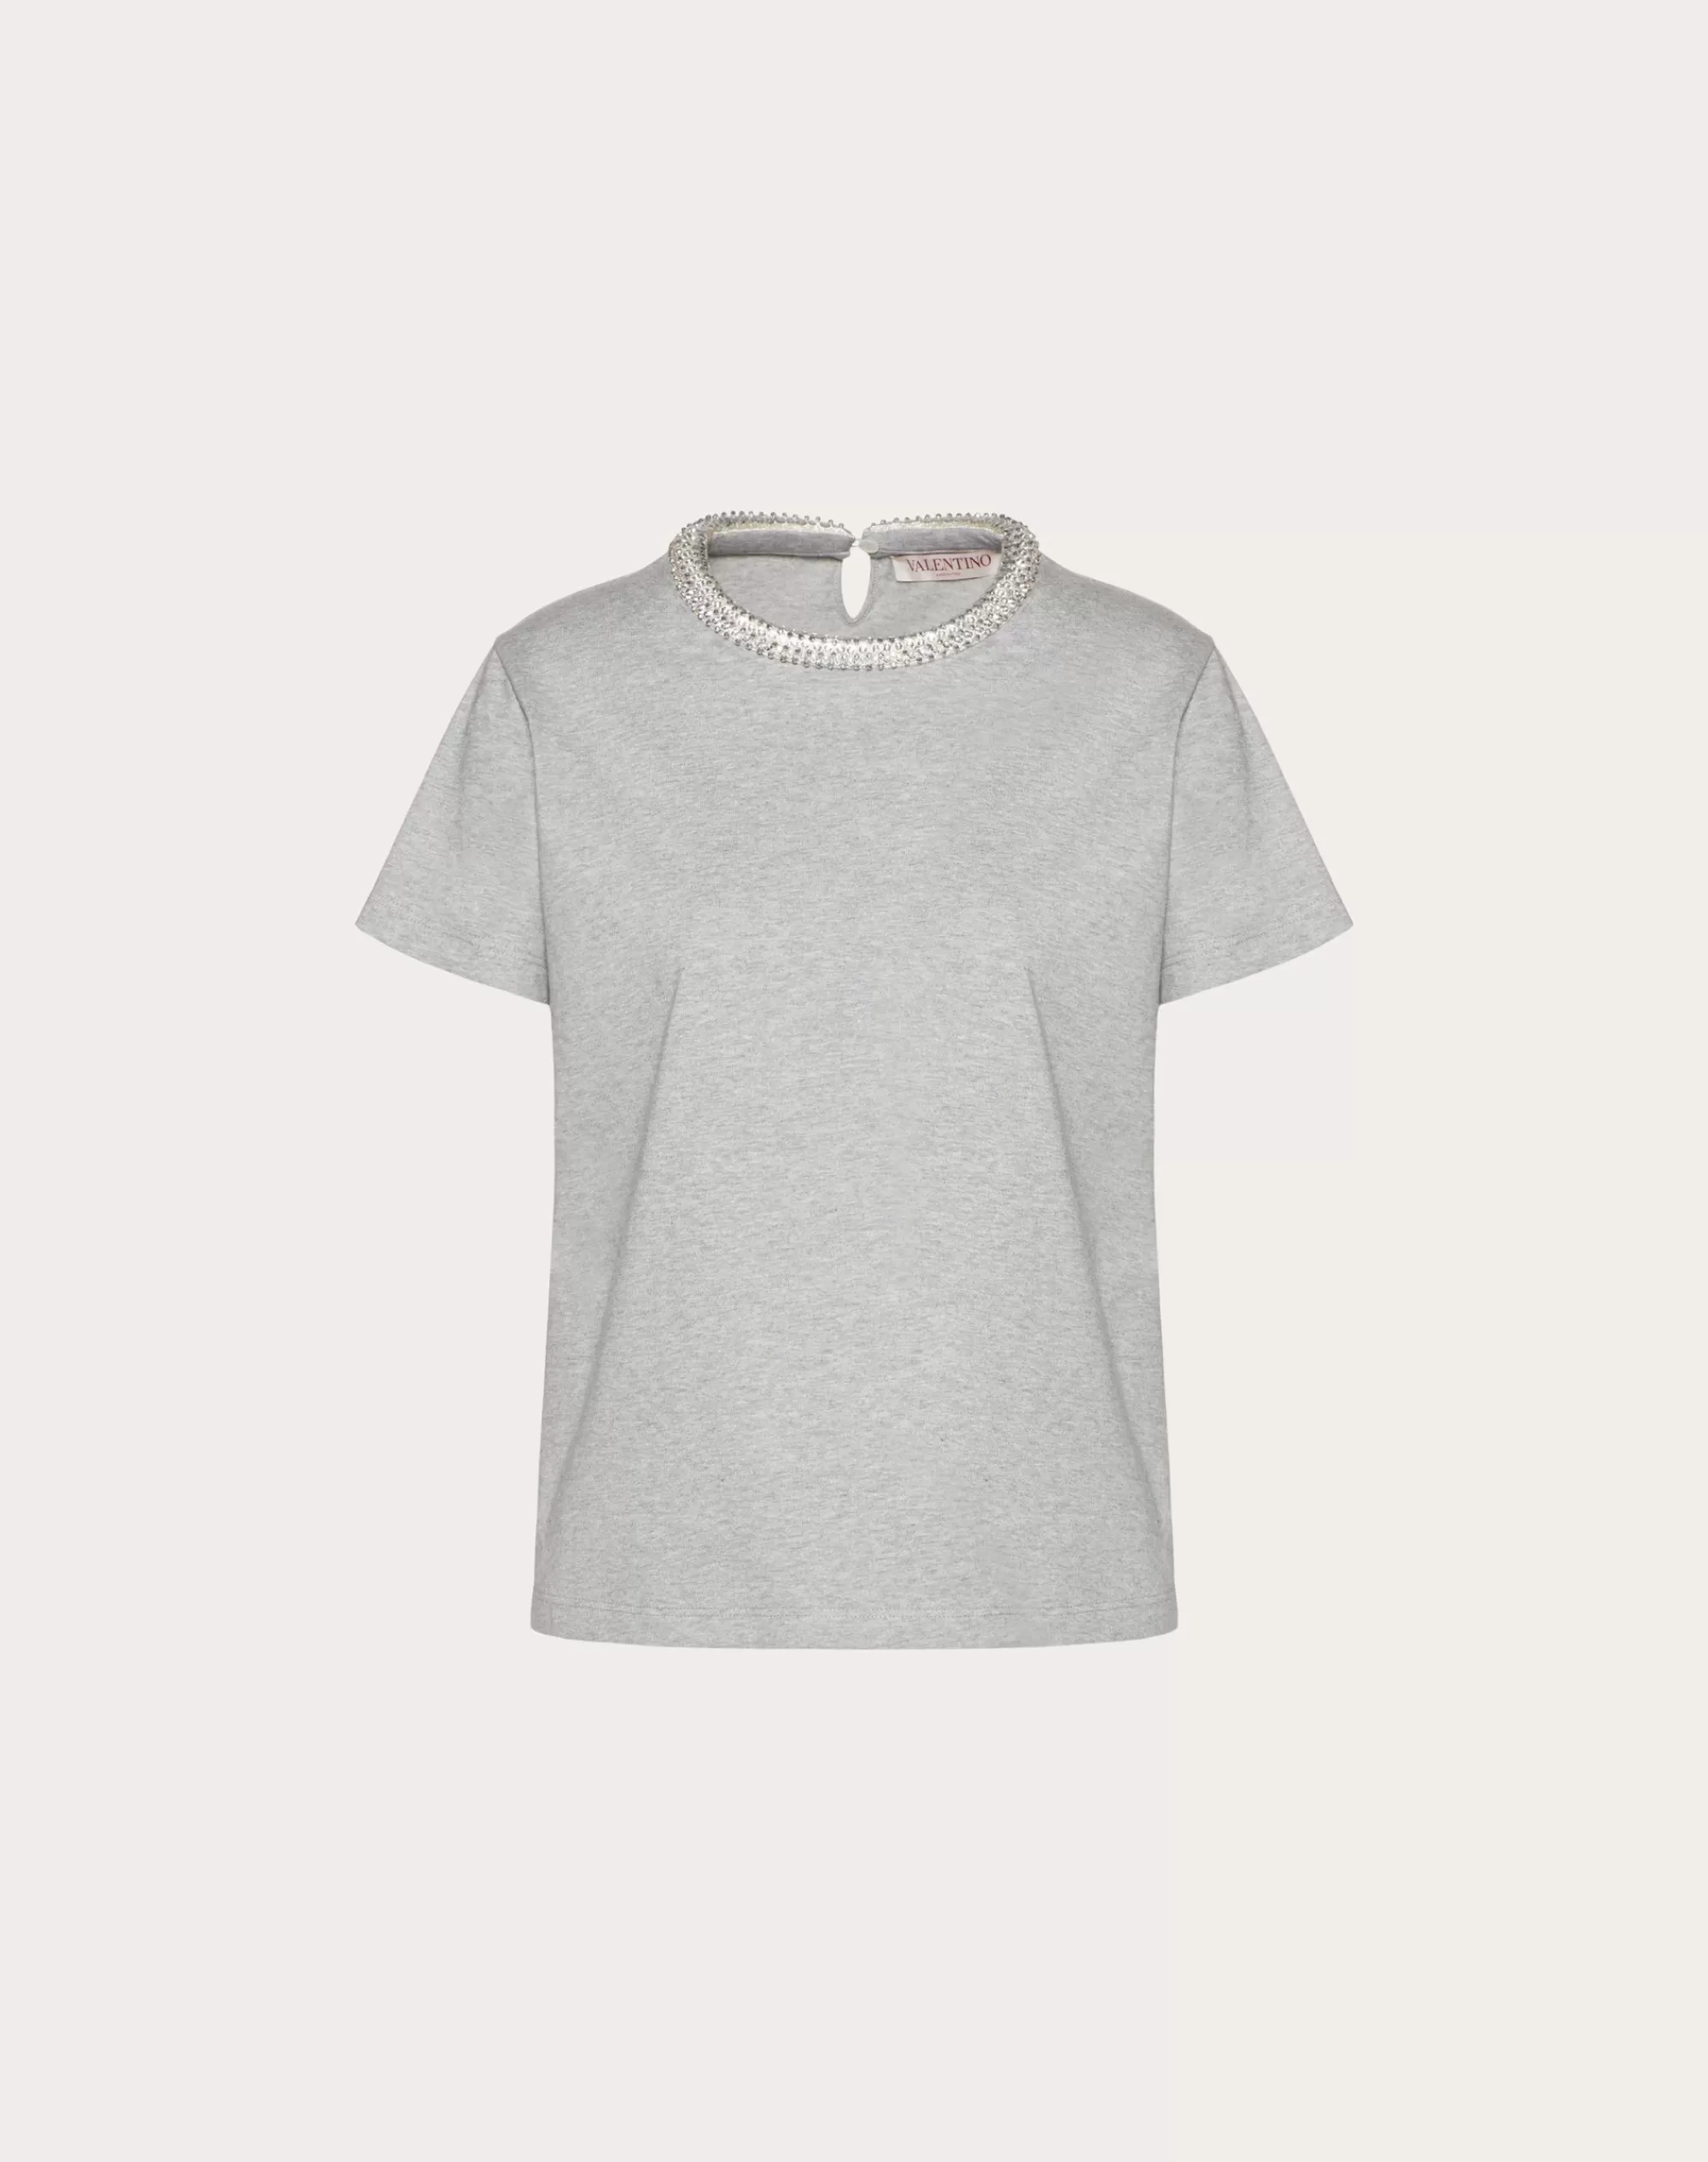 Valentino EMBROIDERED JERSEY T-SHIRT Grey New